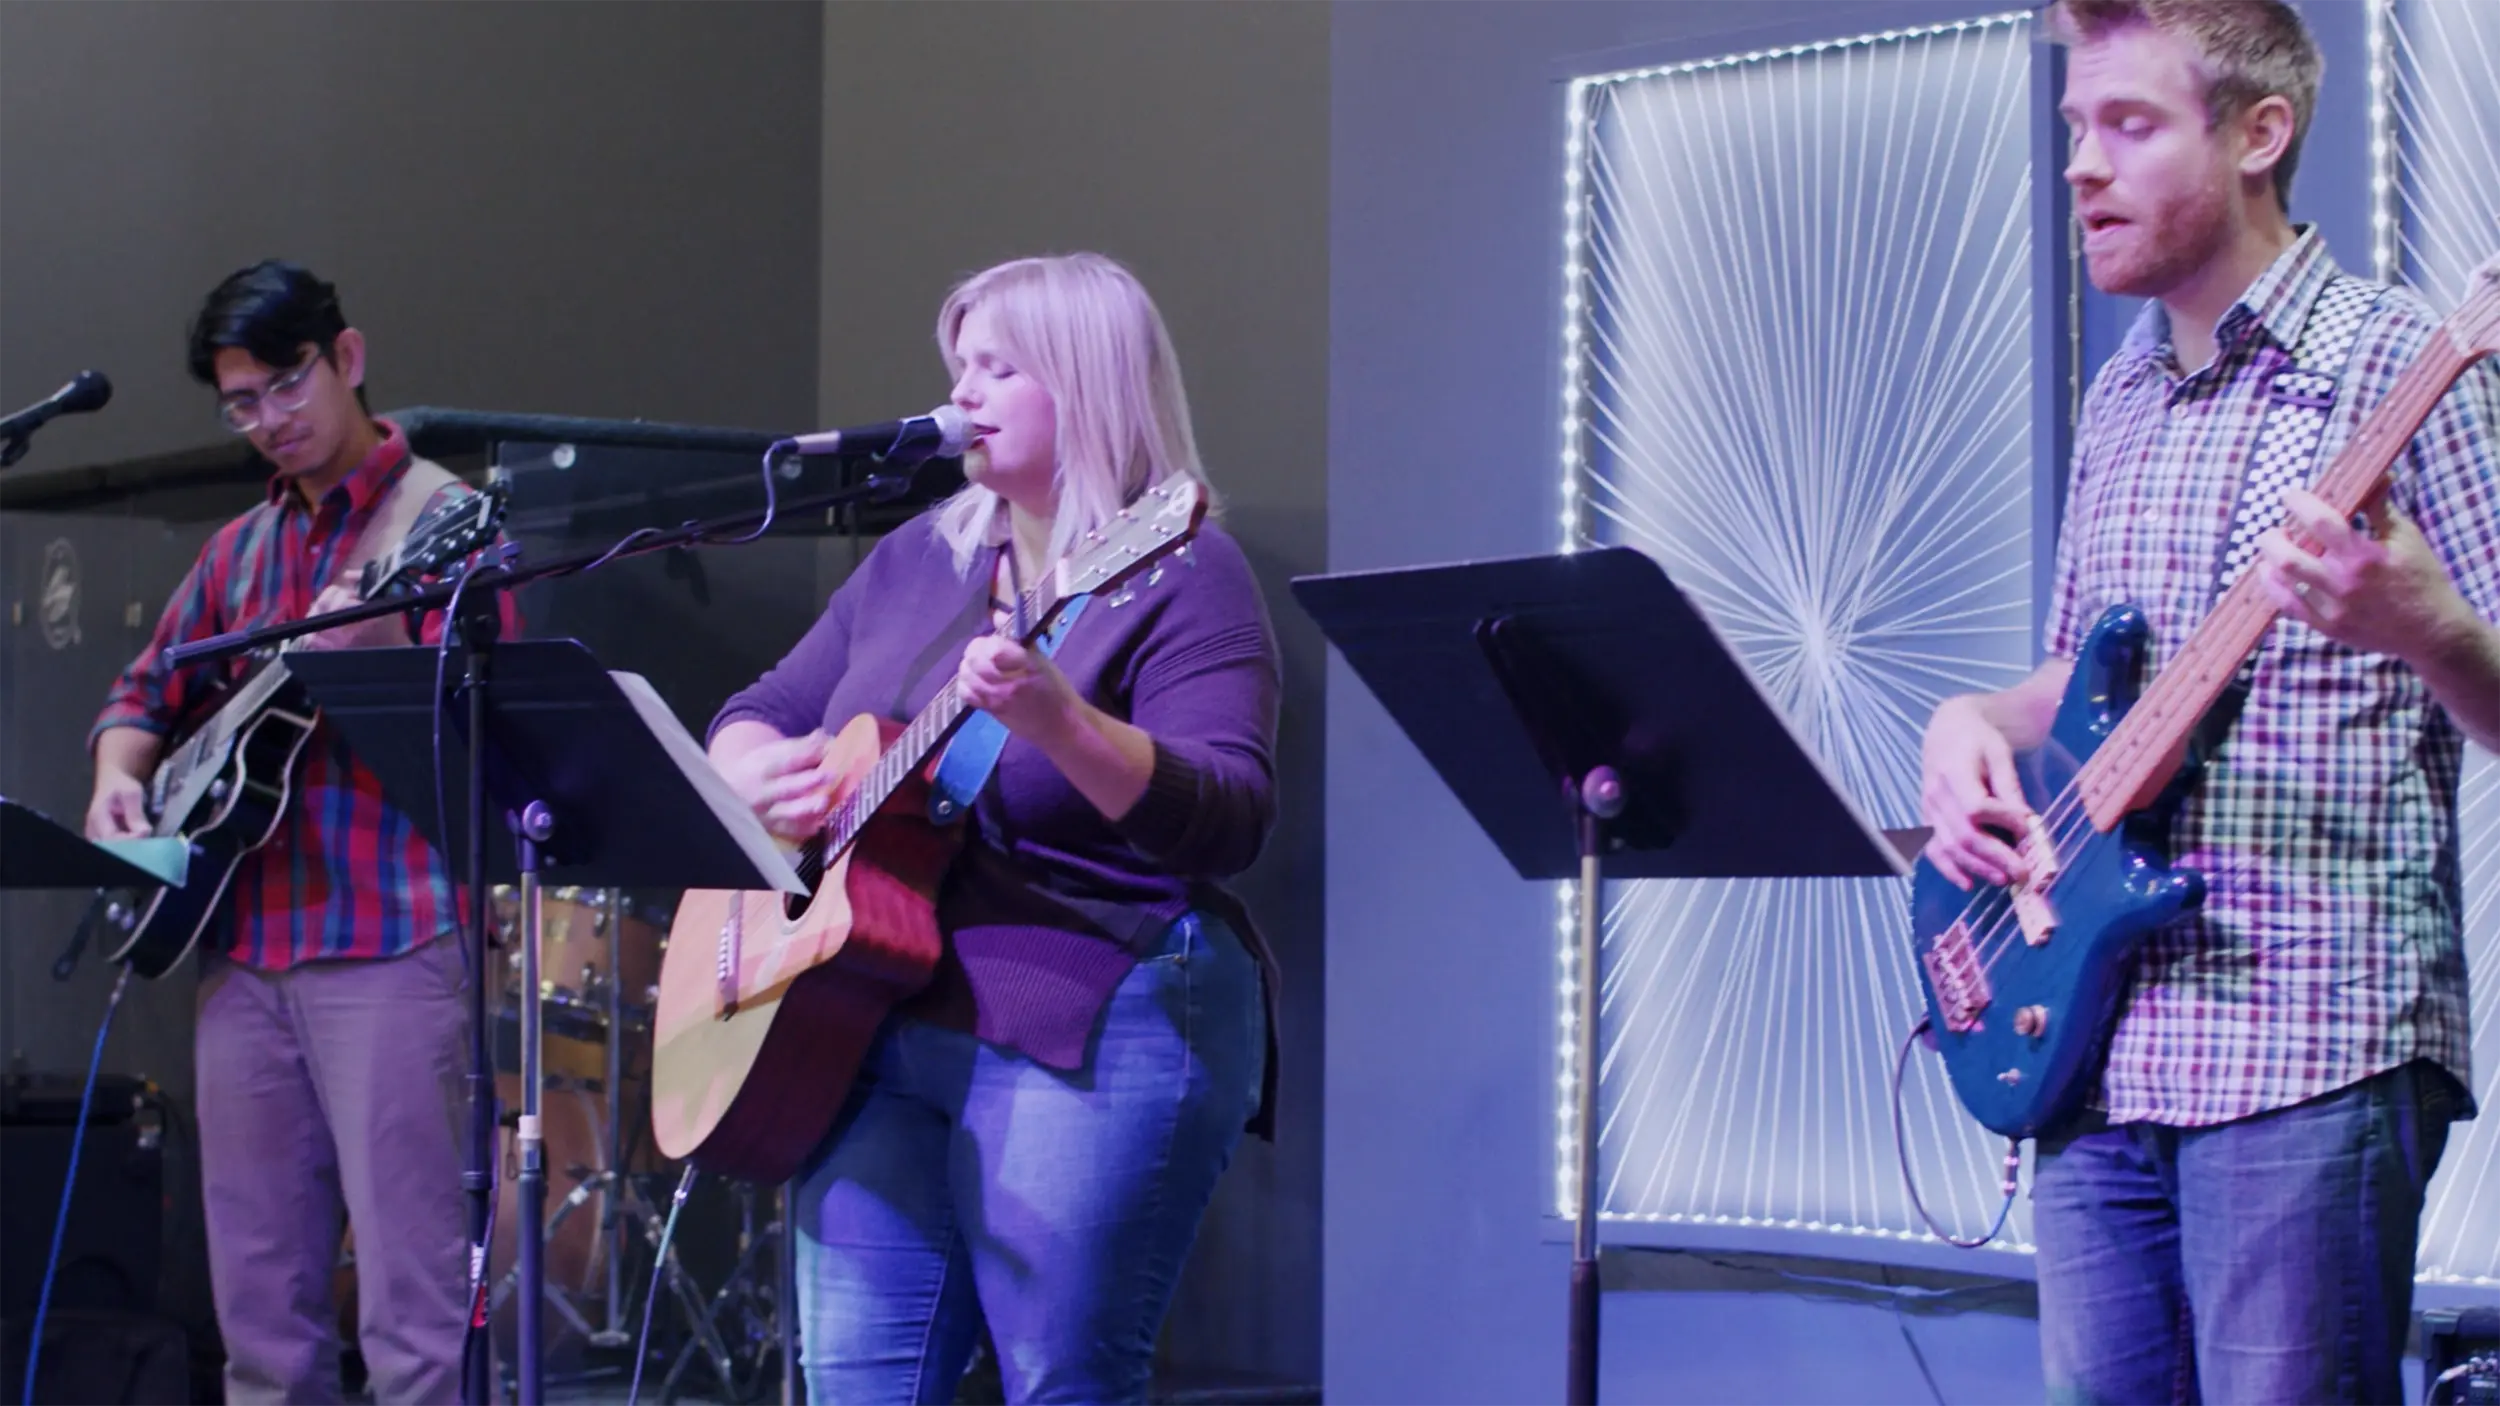 Three guitar players leading worship on a Sunday morning